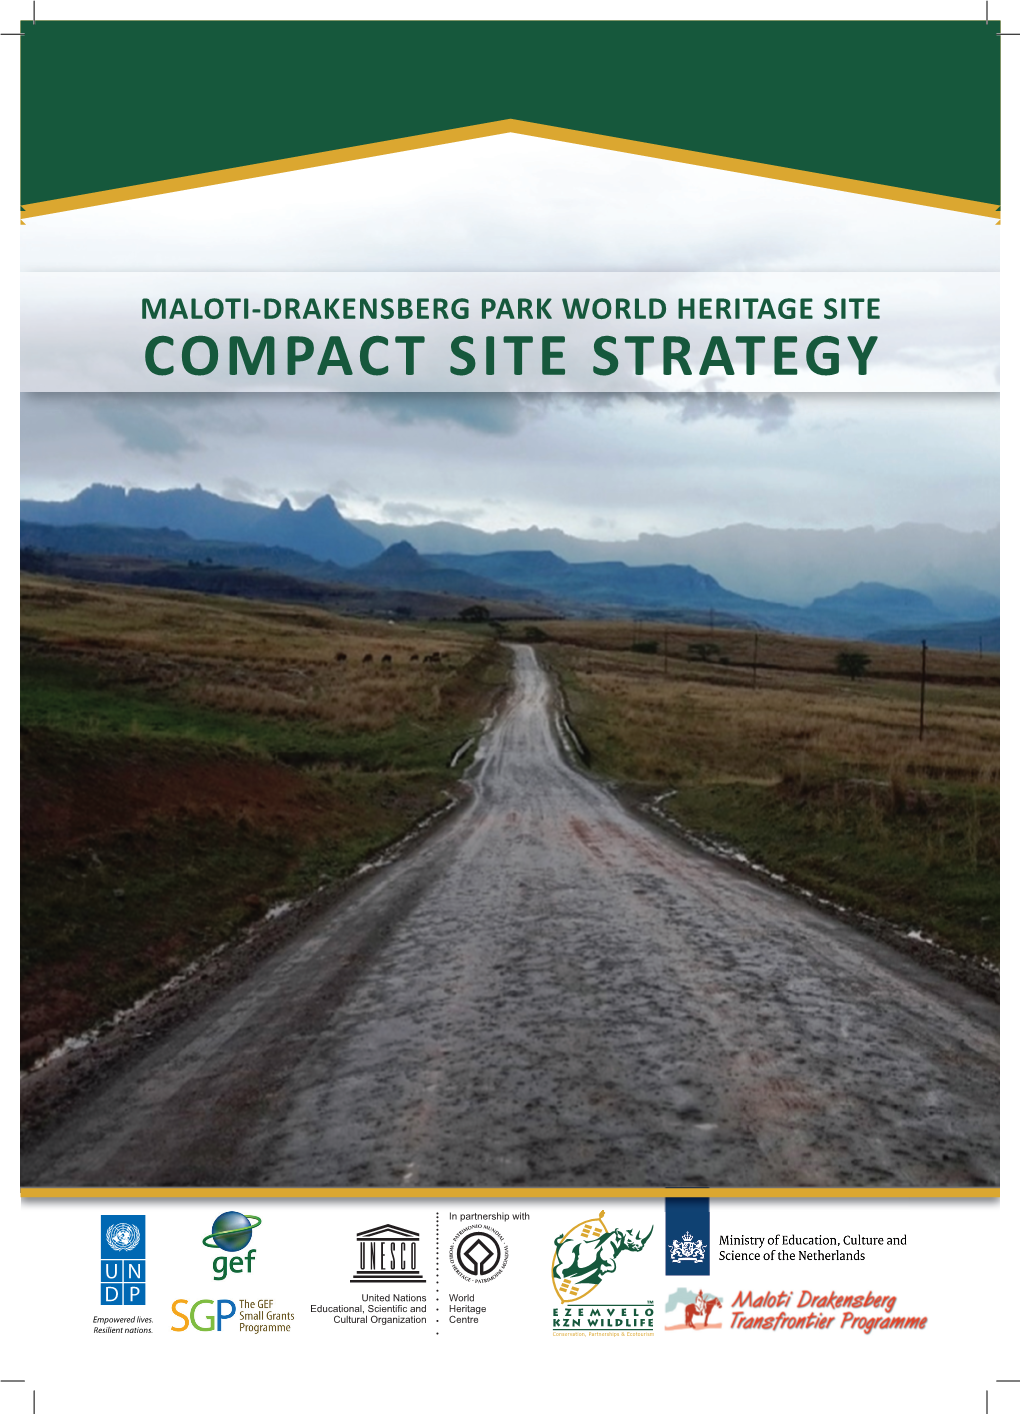 COMPACT Site Strategy for Maloti-Drakensberg Park